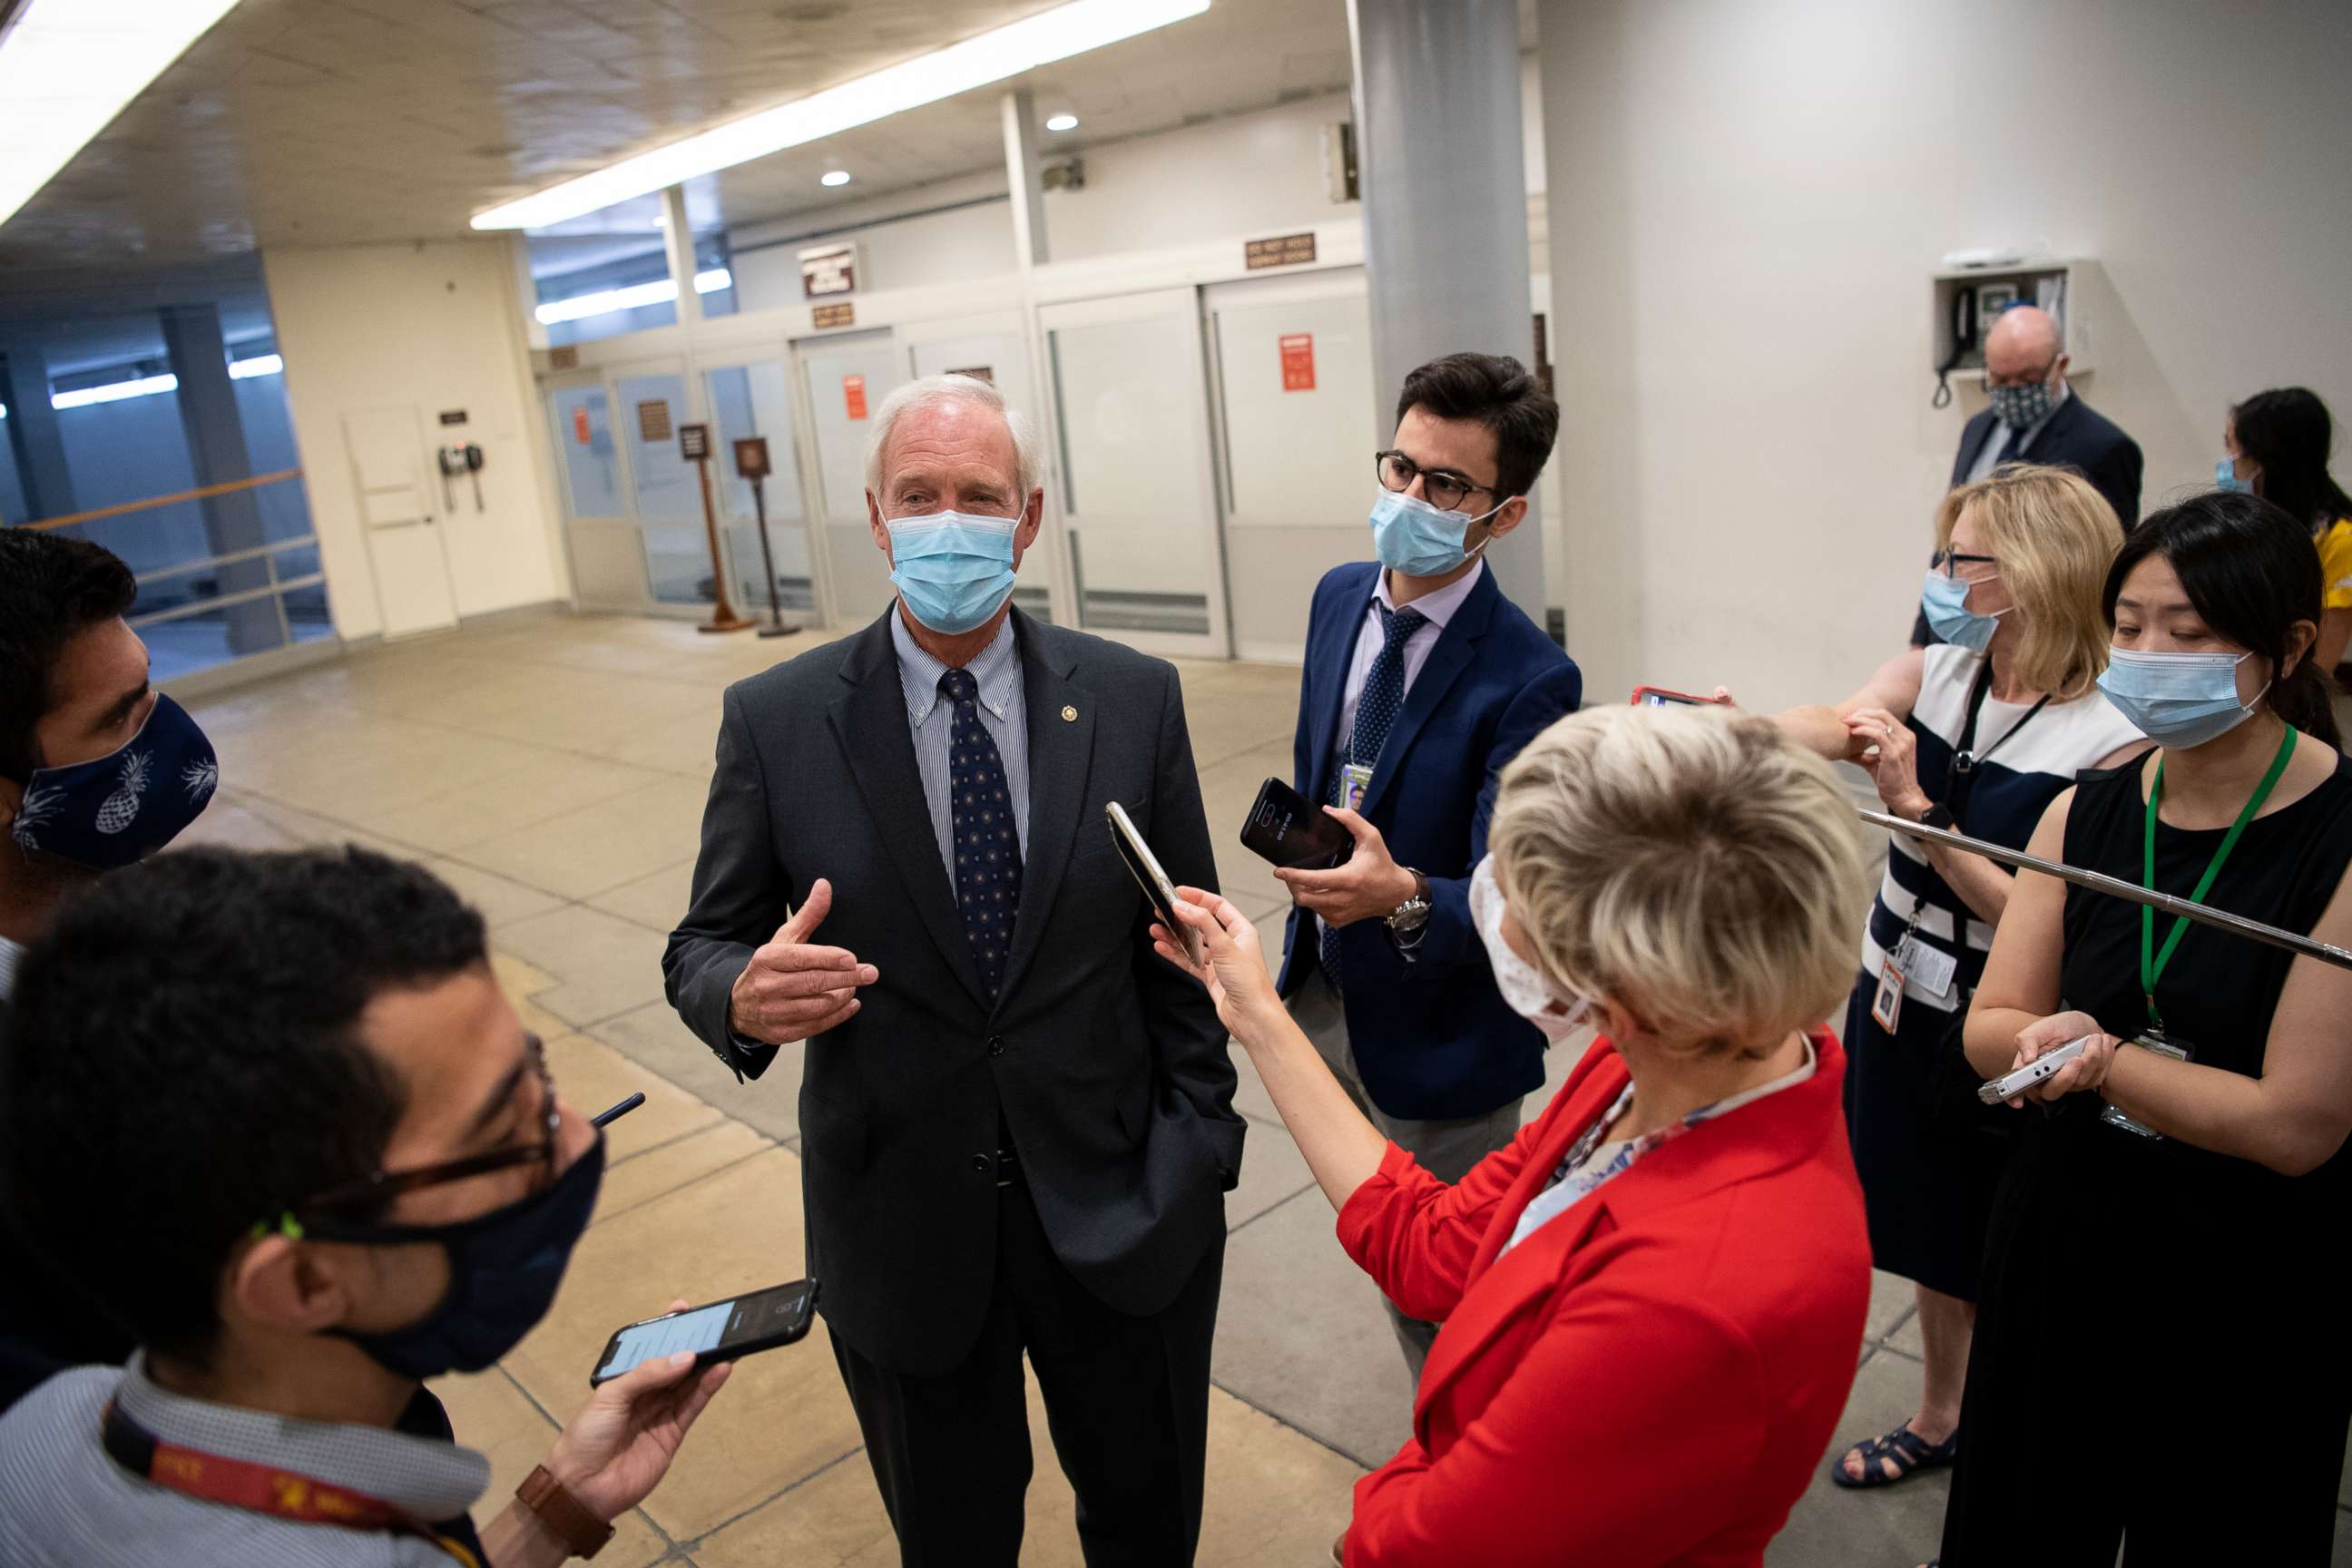 PHOTO: Sen. Ron Johnson talks to members of the press in the Senate Subway on his way to a vote in the Capitol on July 22, 2020, in Washington.